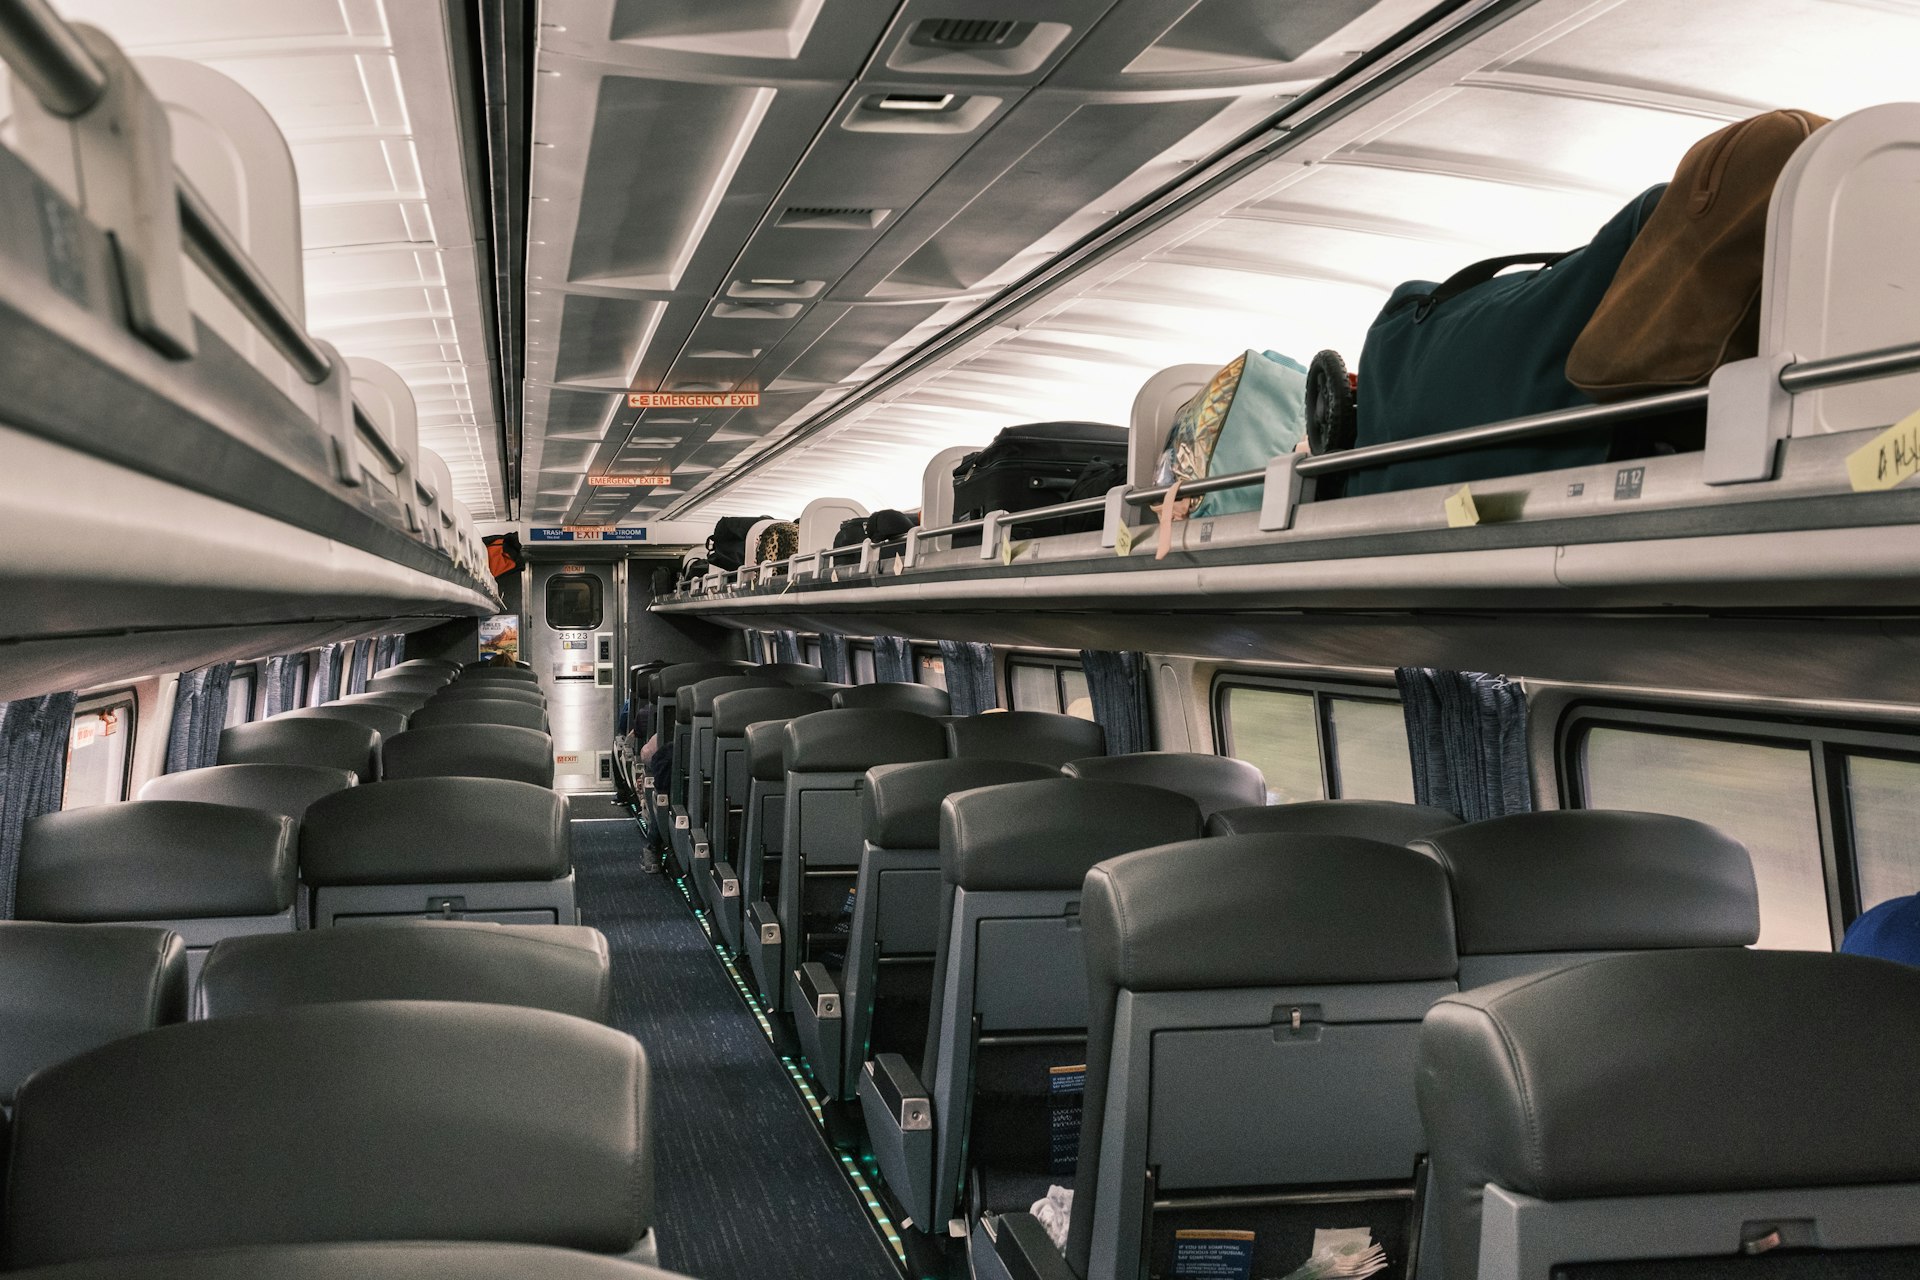 The interior of the Silver Meteor showing the blue seats and luggage compartments above